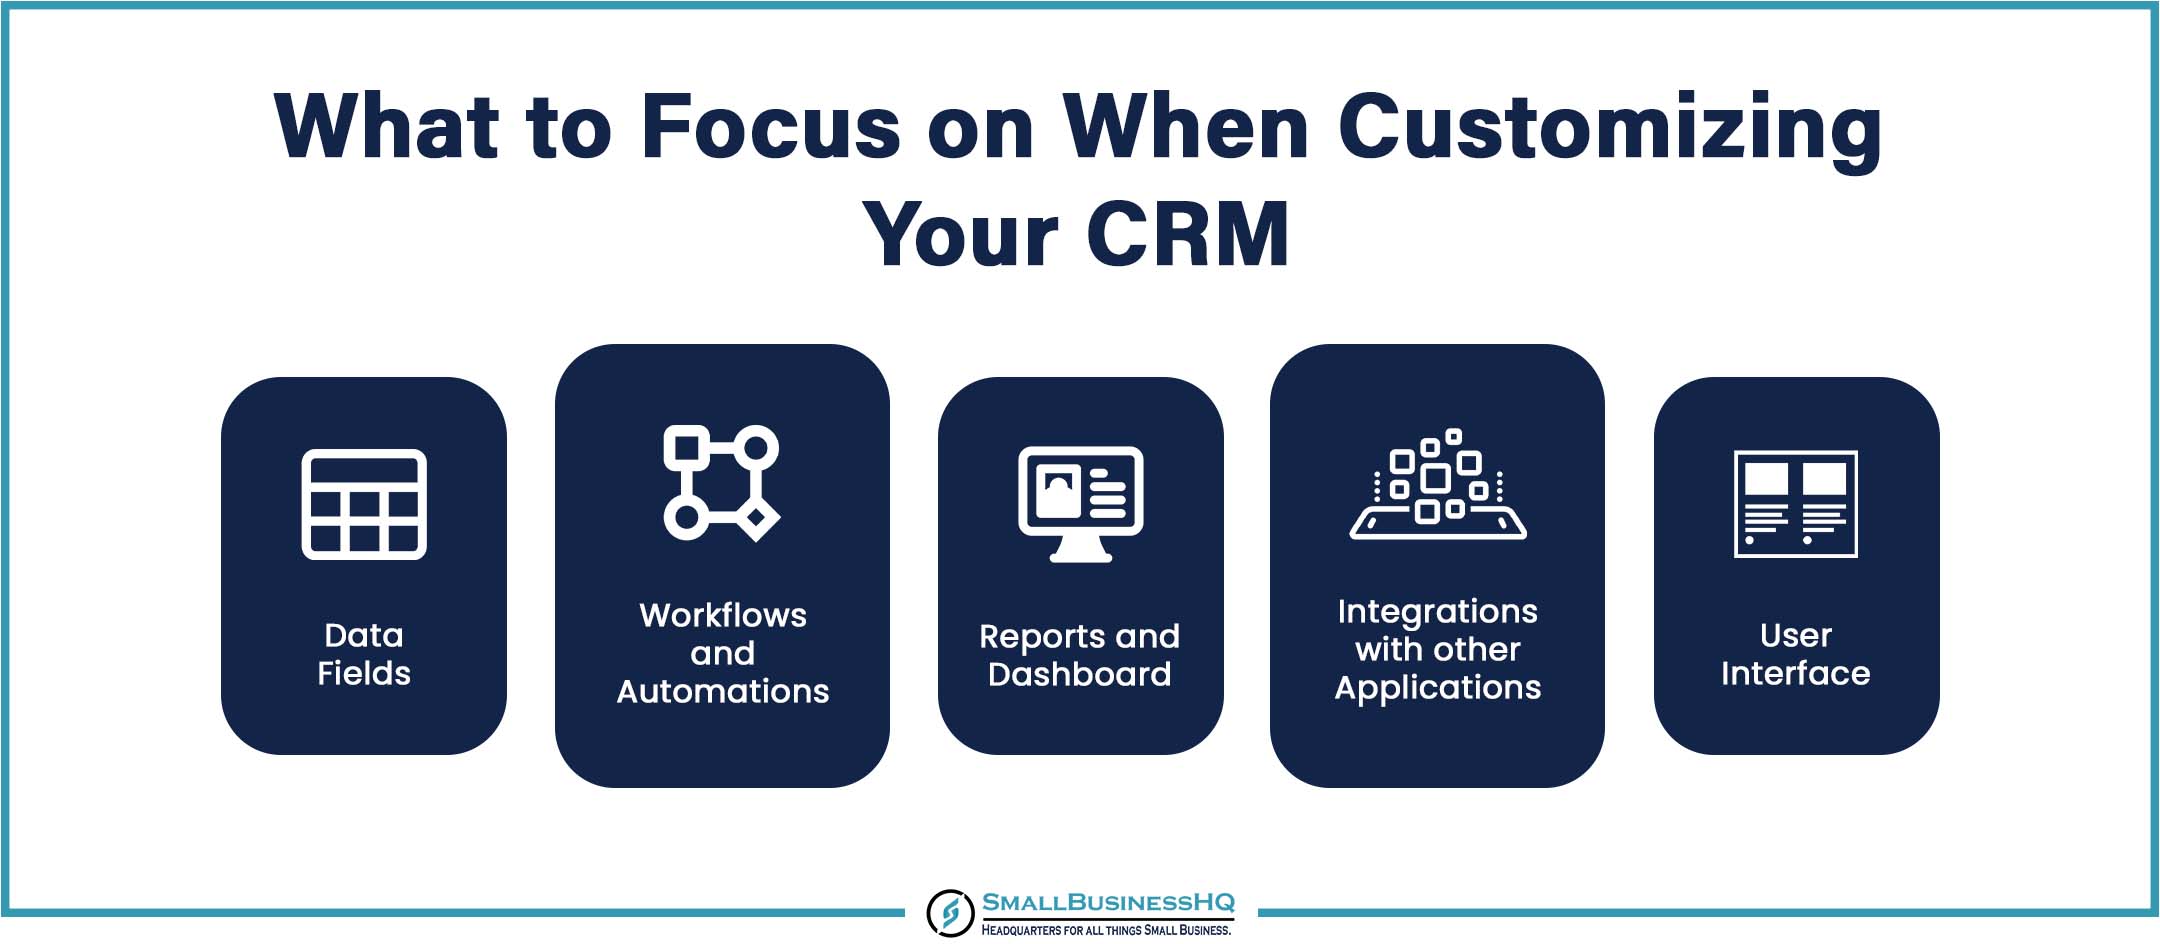 What to Focus on When Customizing Your CRM